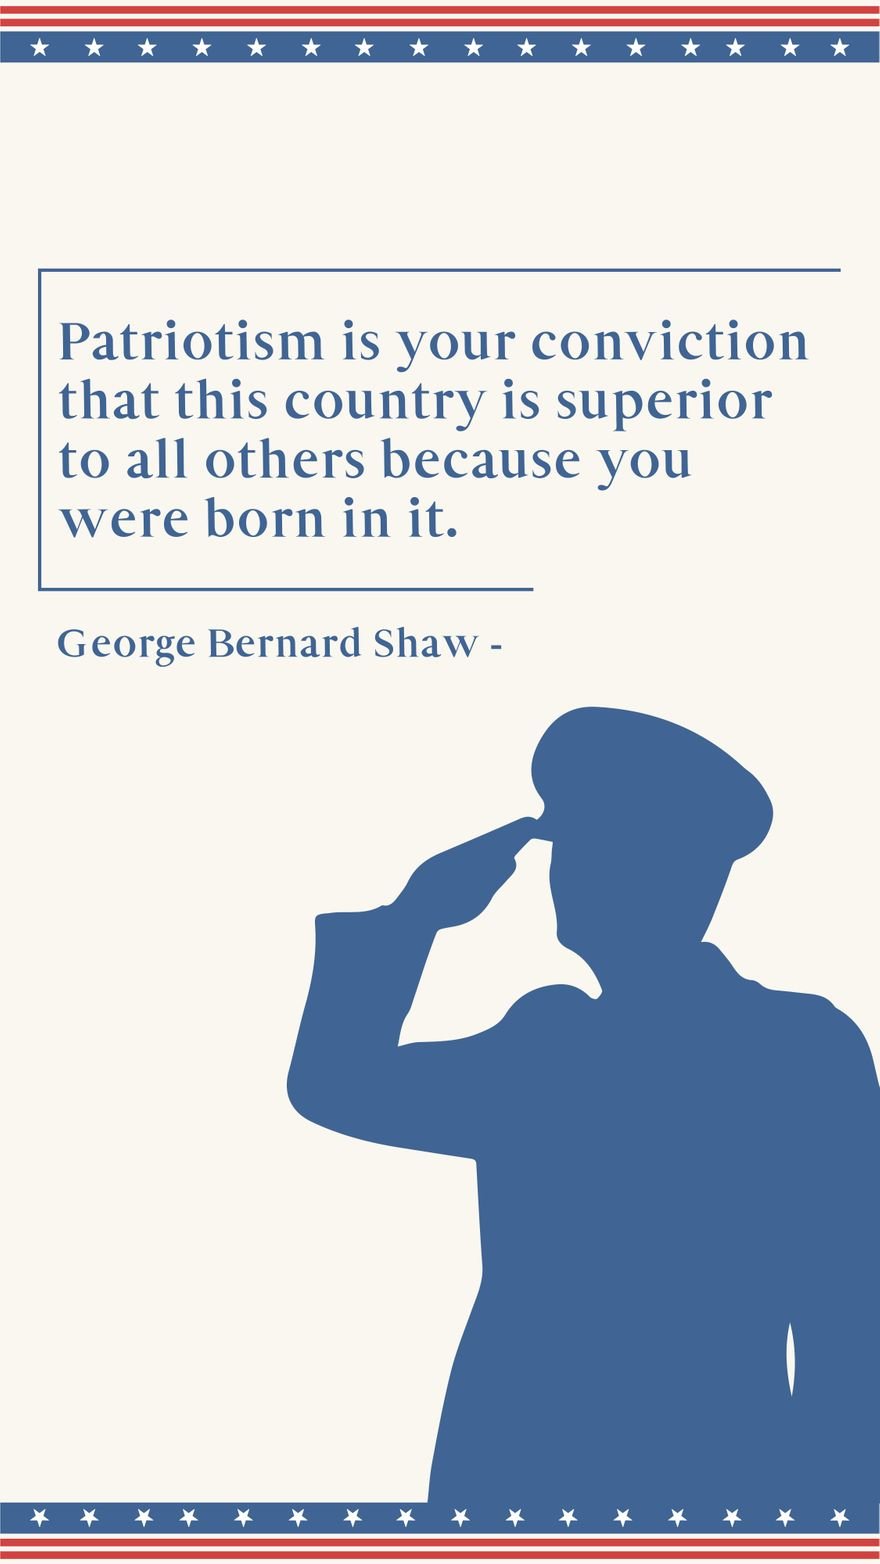 Free George Bernard Shaw - Patriotism is your conviction that this country is superior to all others because you were born in it.